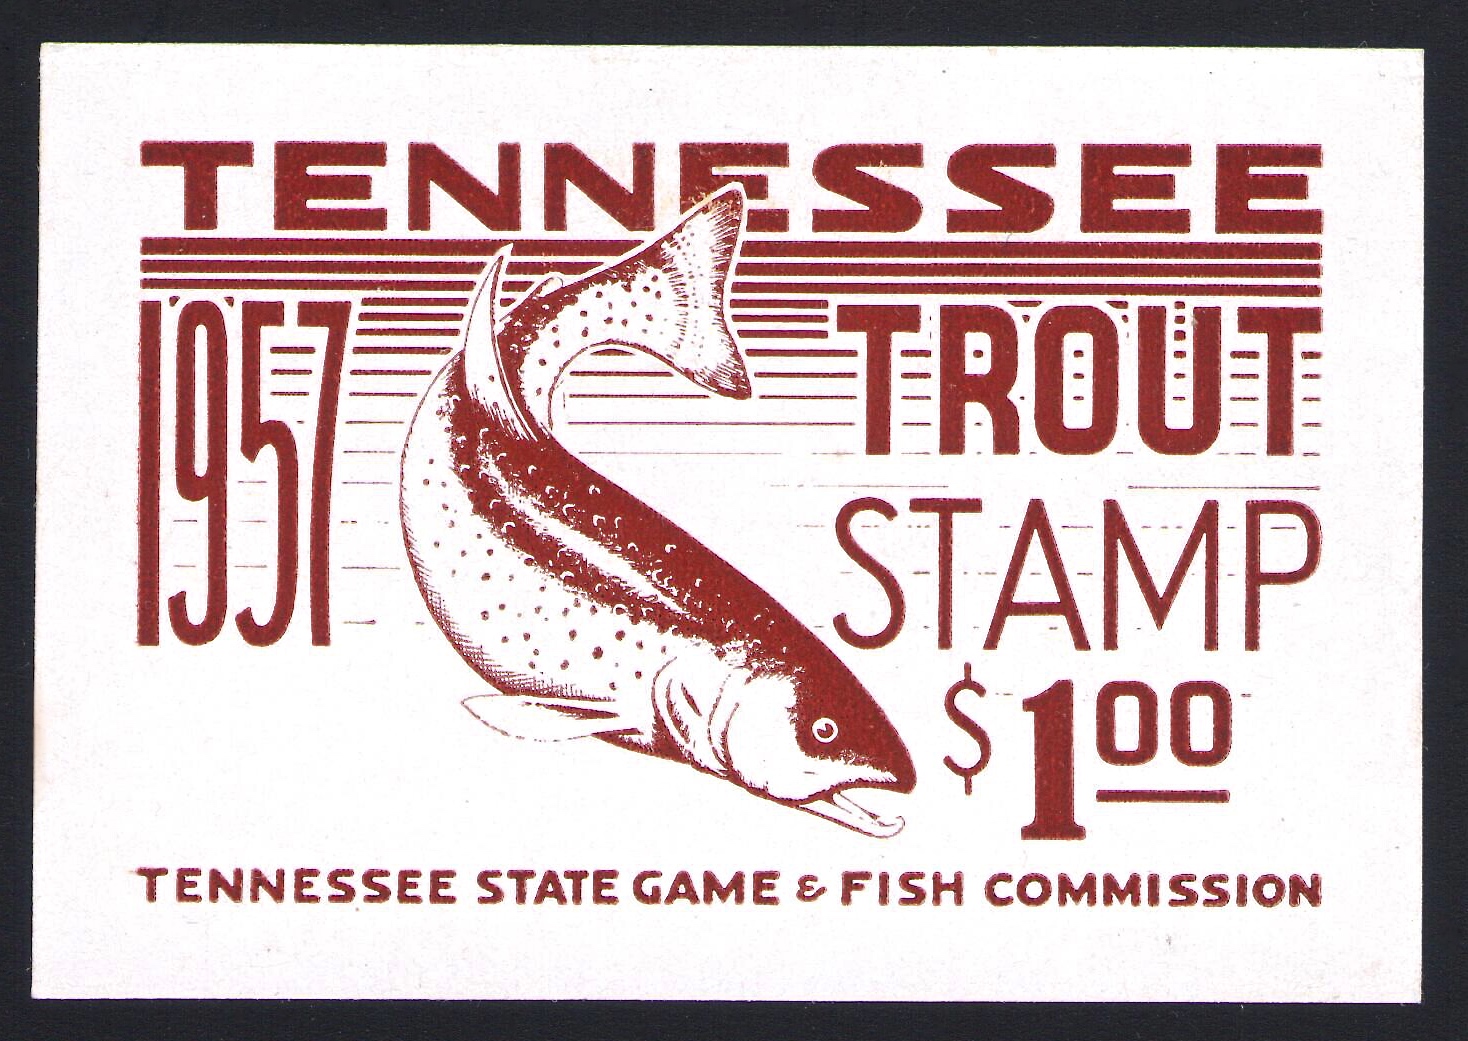 1957 Tennessee Trout Essay